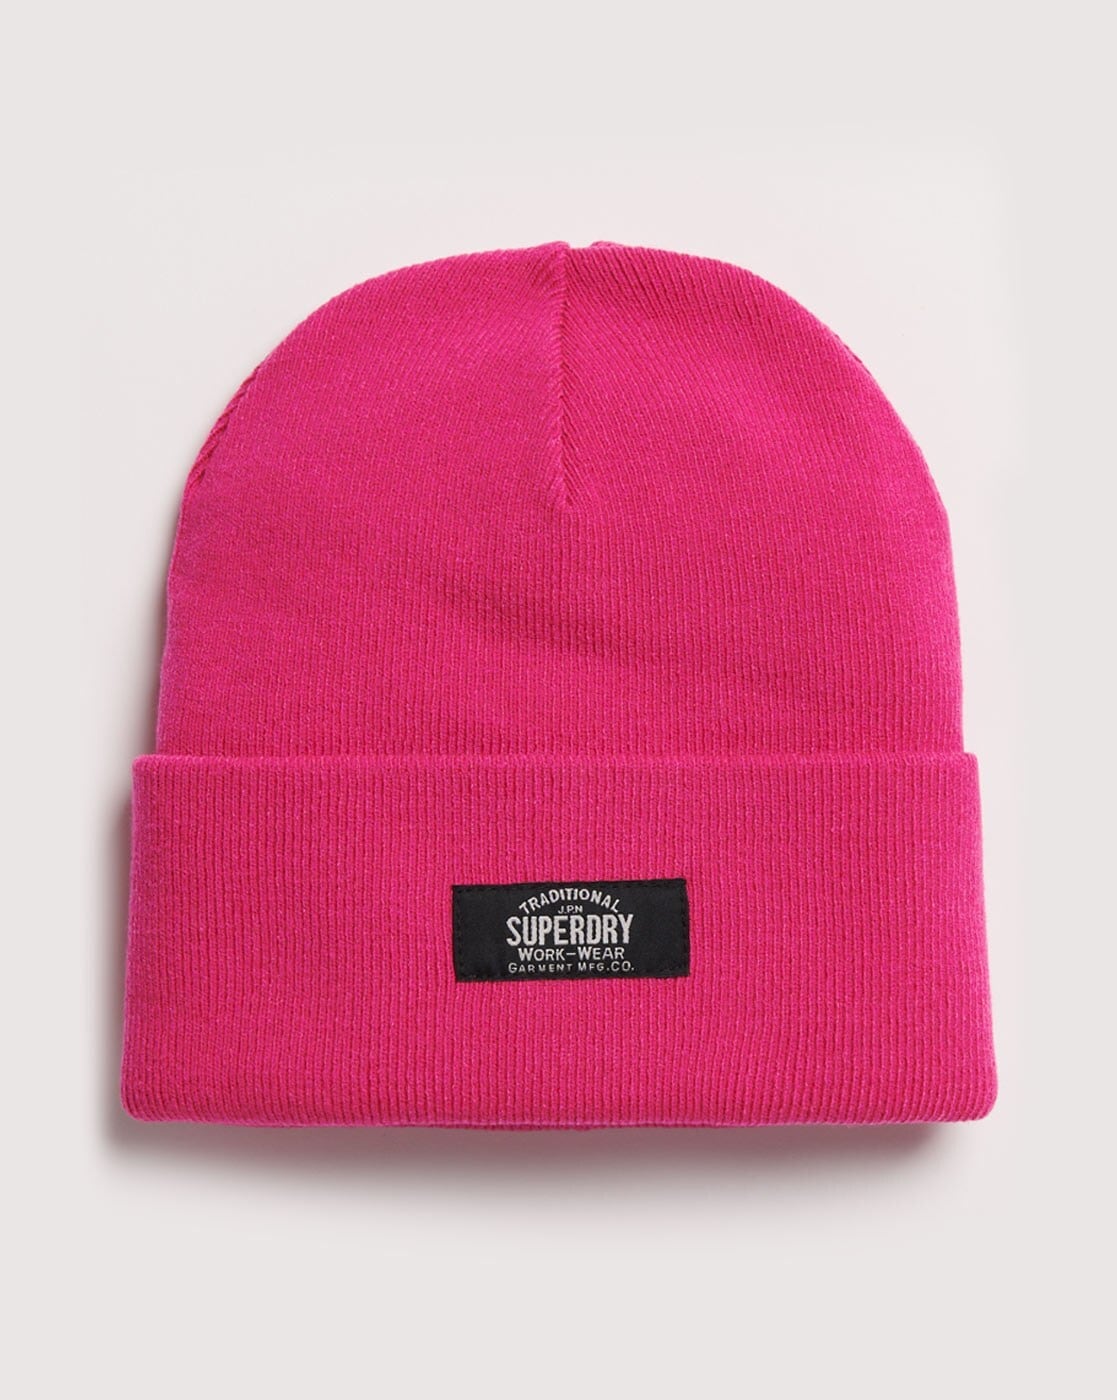 Buy Pink Caps & Hats by for SUPERDRY Online Men